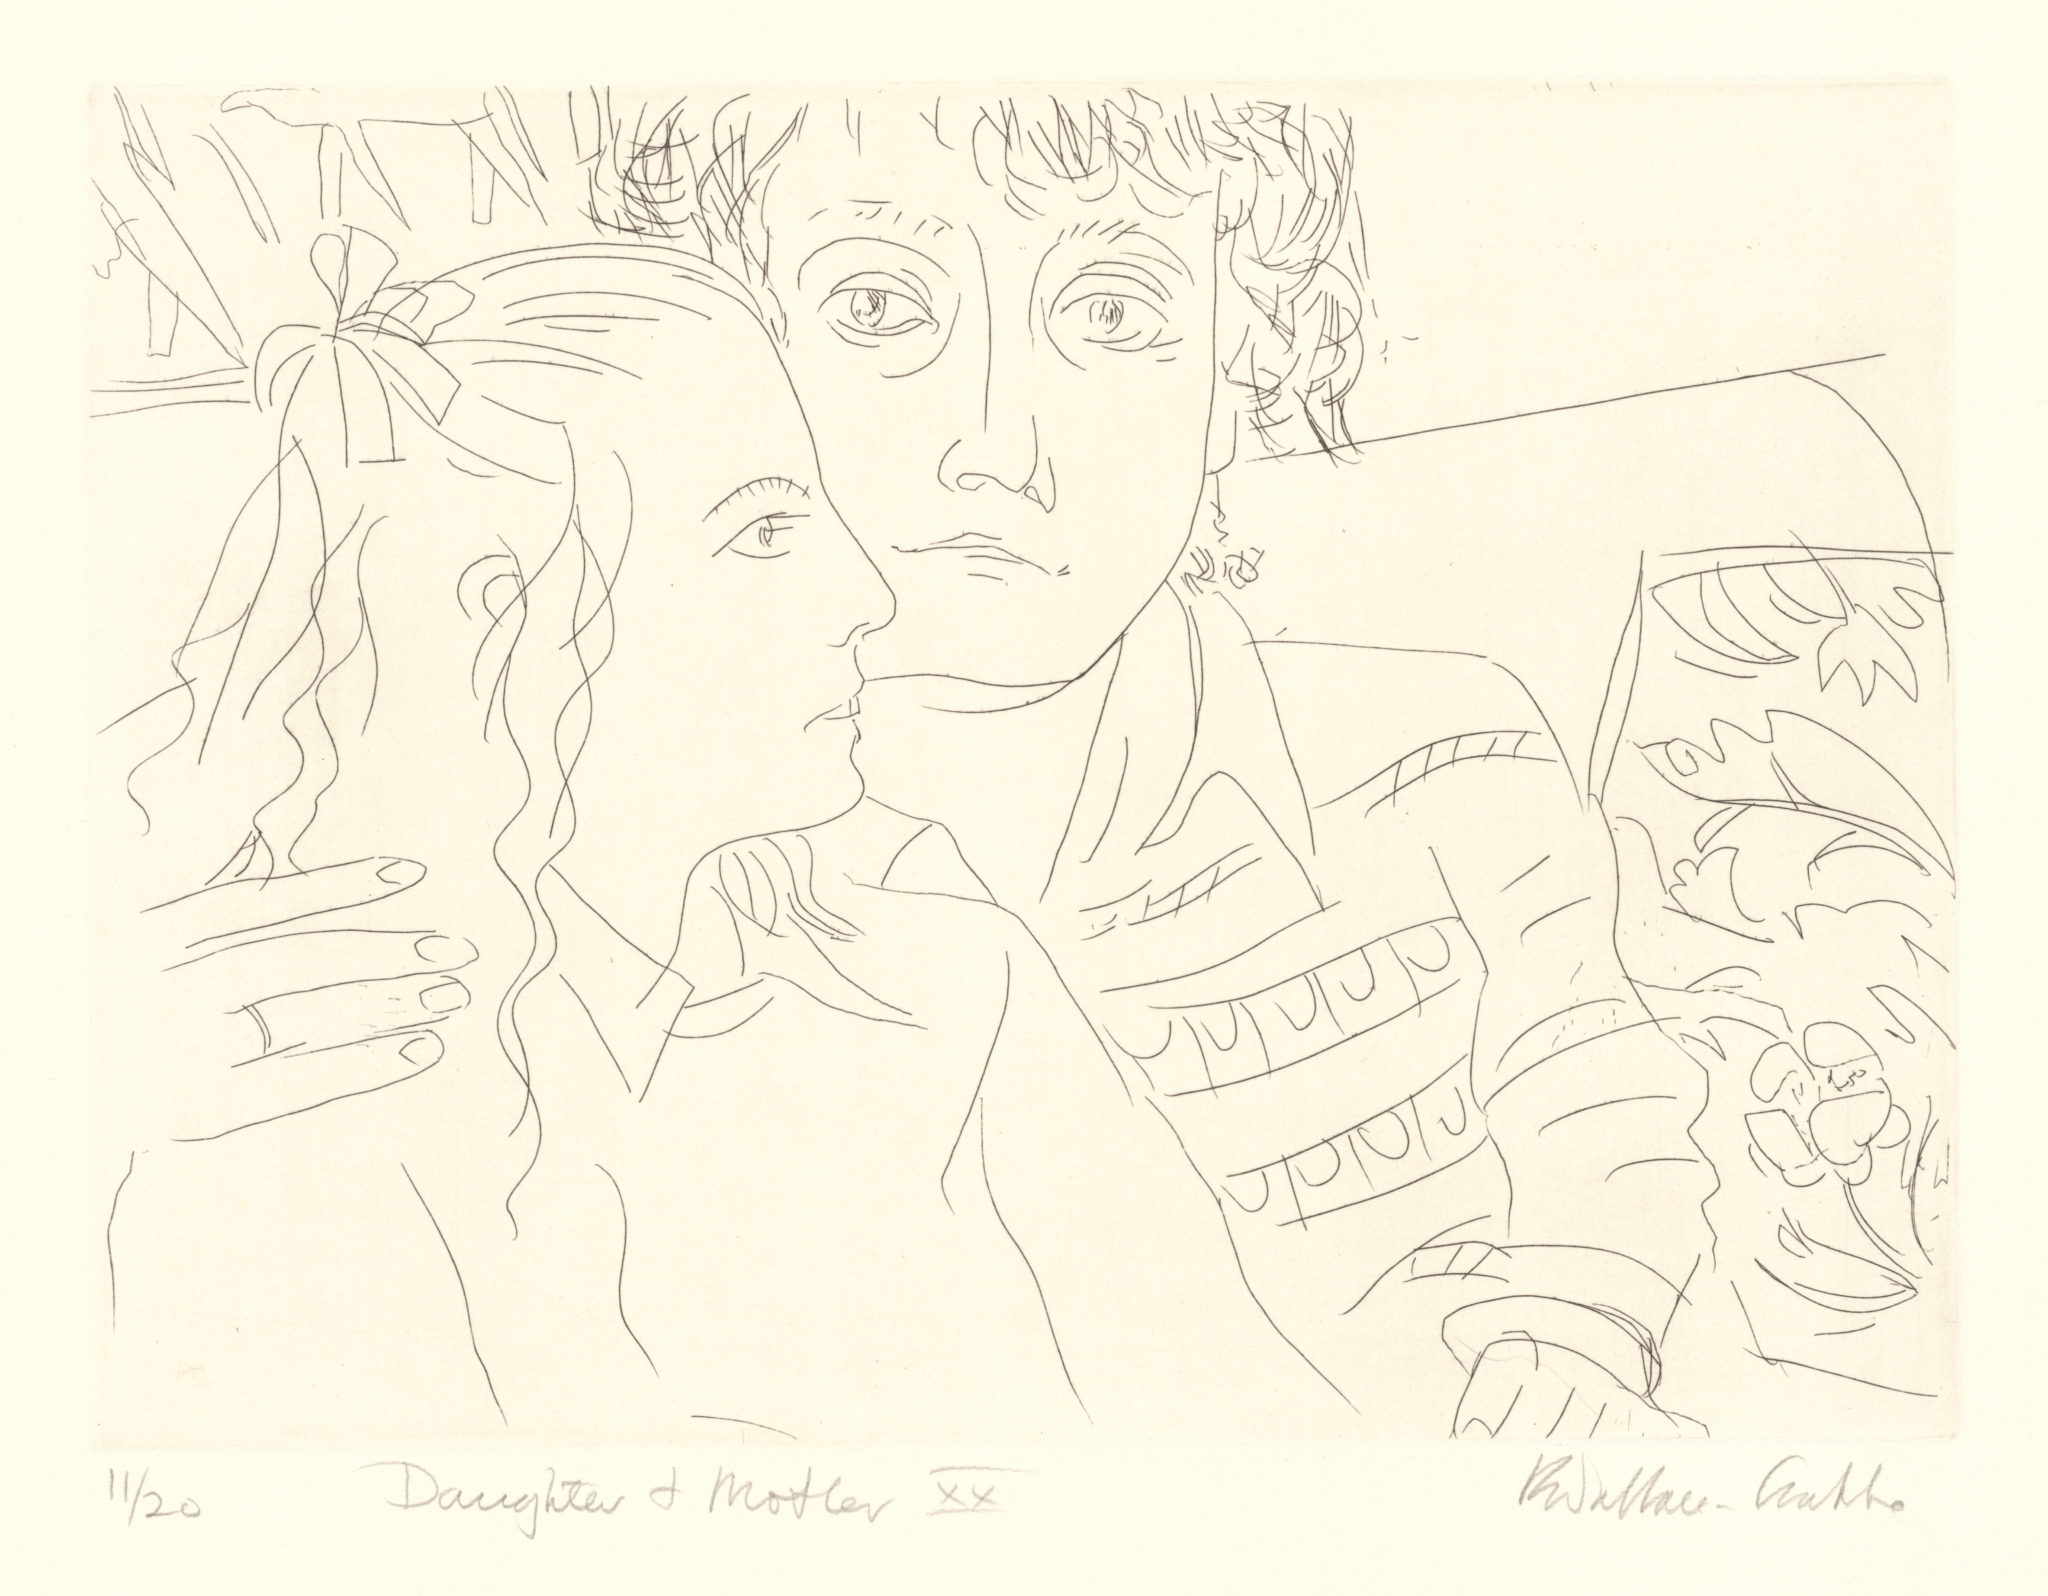 Robin Wallace-Crabbe, Daughter and Mother XX, 1989, Etching, Ed 11/20, 27 x 36 cm image, 40 x 54 cm sheet, Latrobe Regional Gallery Collection, gift of the Latrobe Regional Gallery Society, 1992.